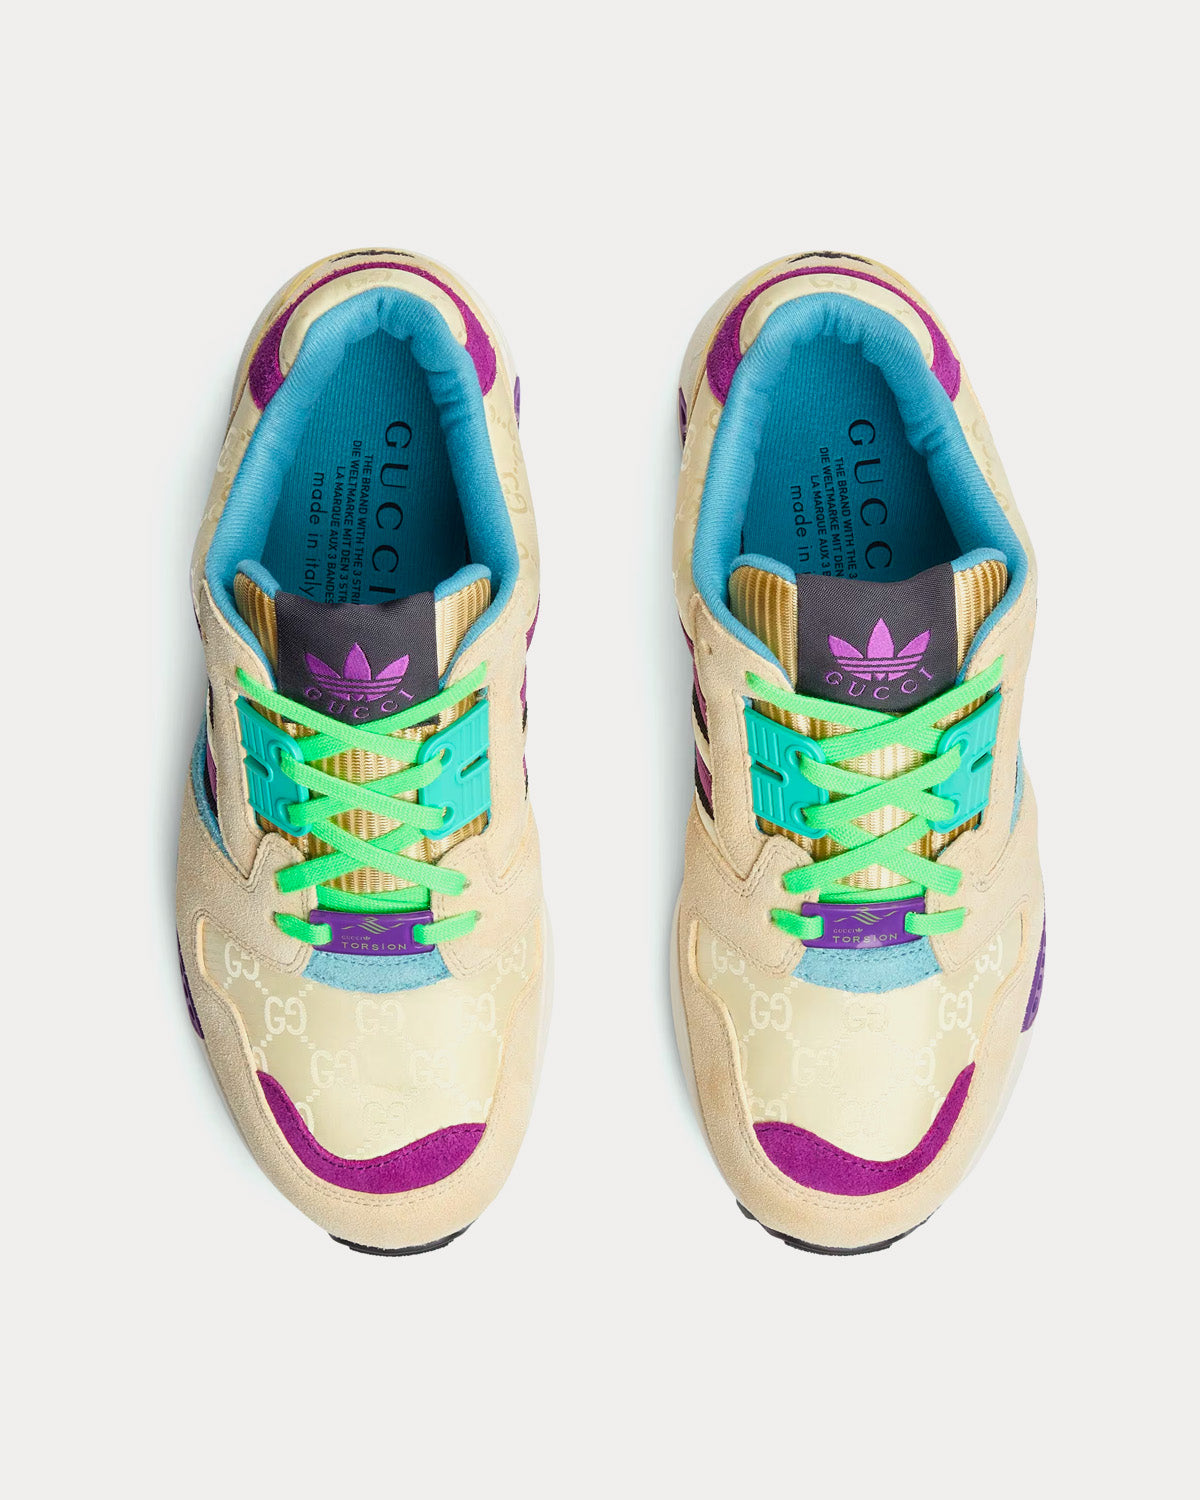 Adidas x Gucci - ZX8000 GG Canvas Beige / Purple Low Top Sneakers